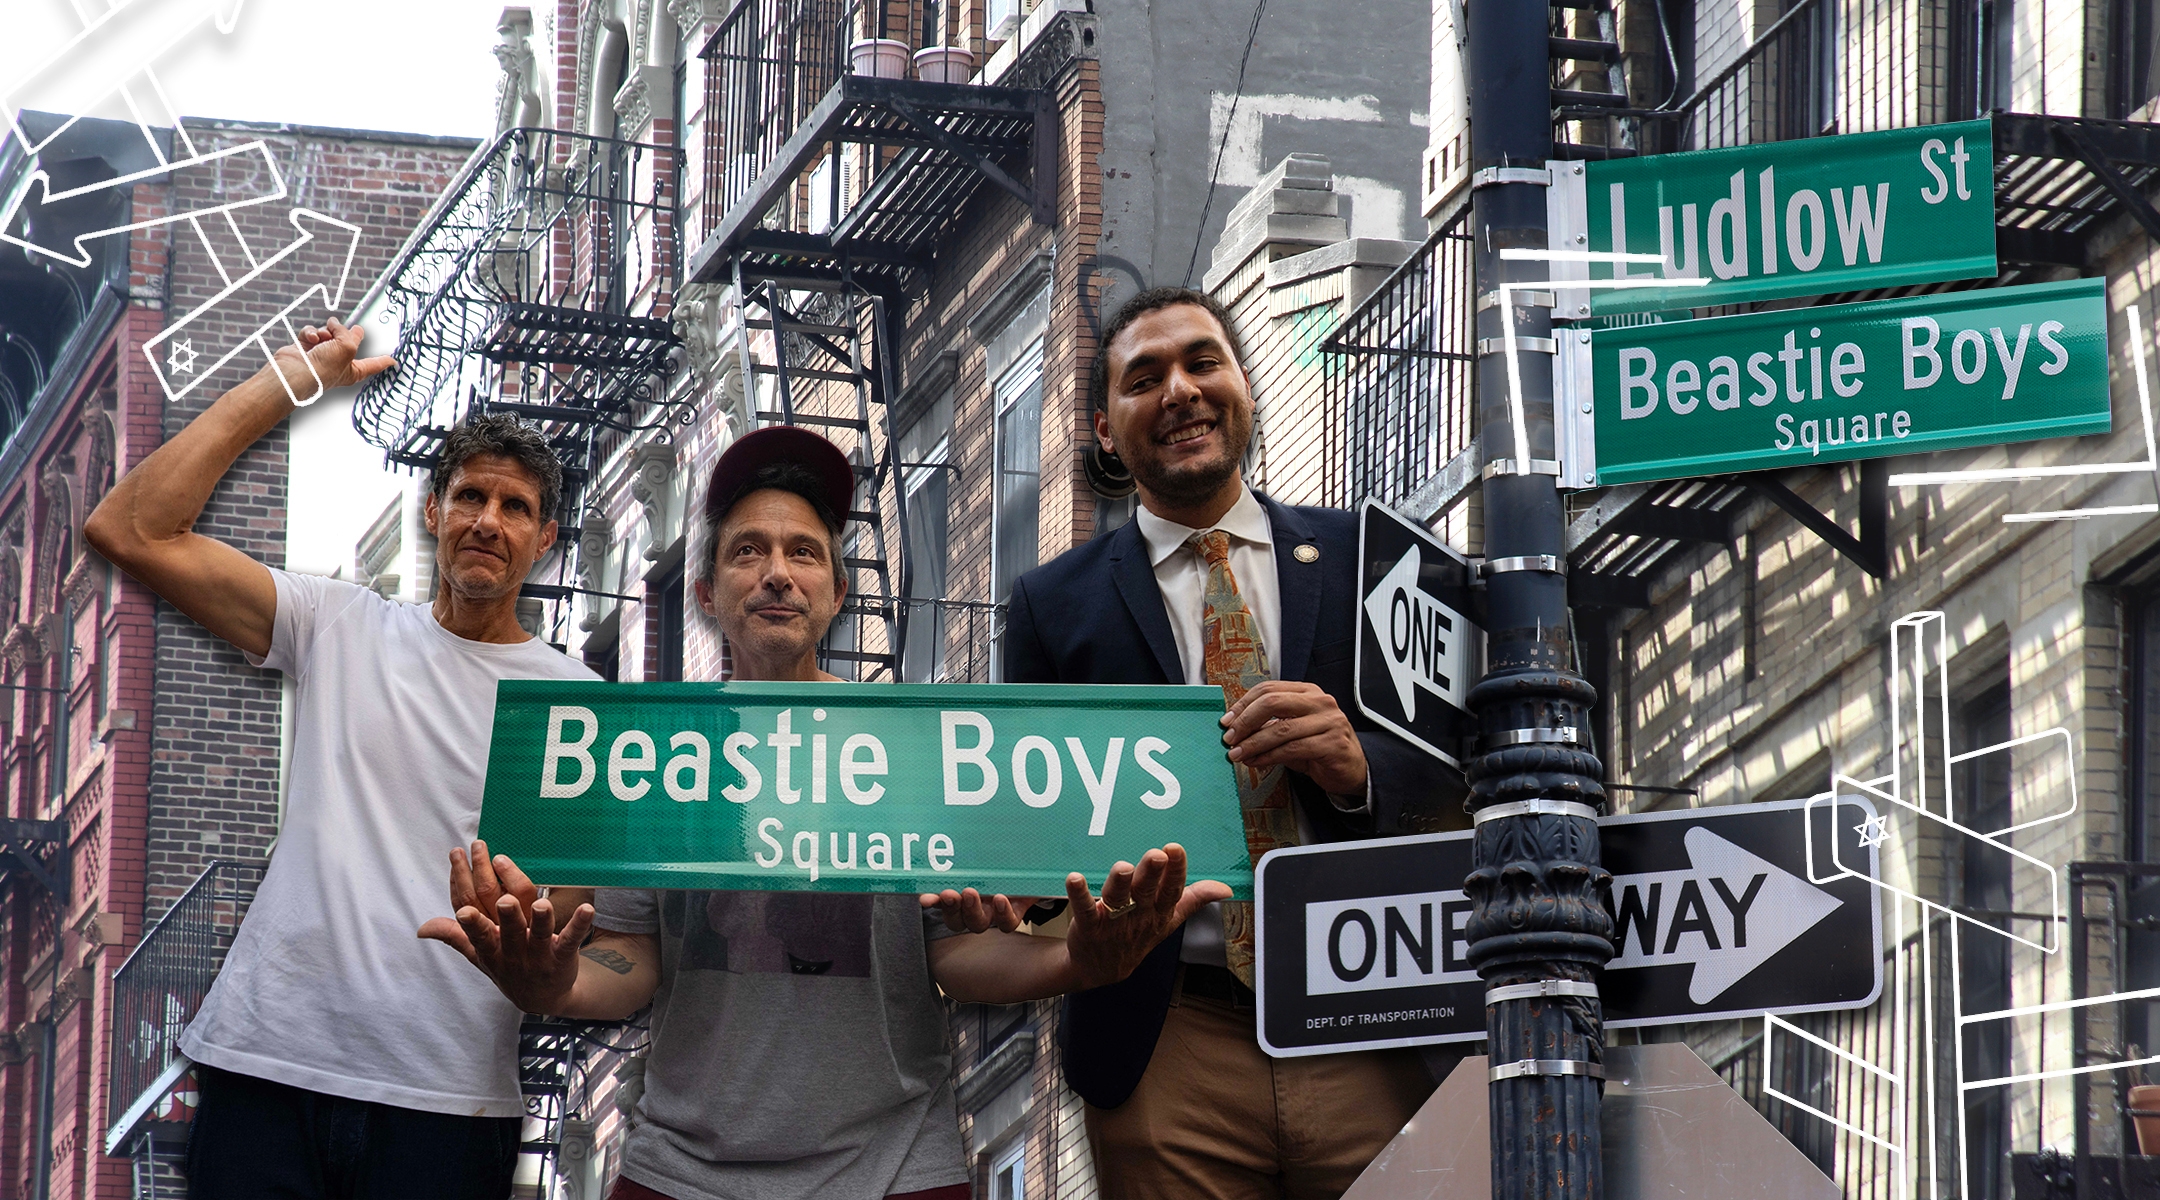 Manhattan corner featured on Paul's Boutique cover to be renamed